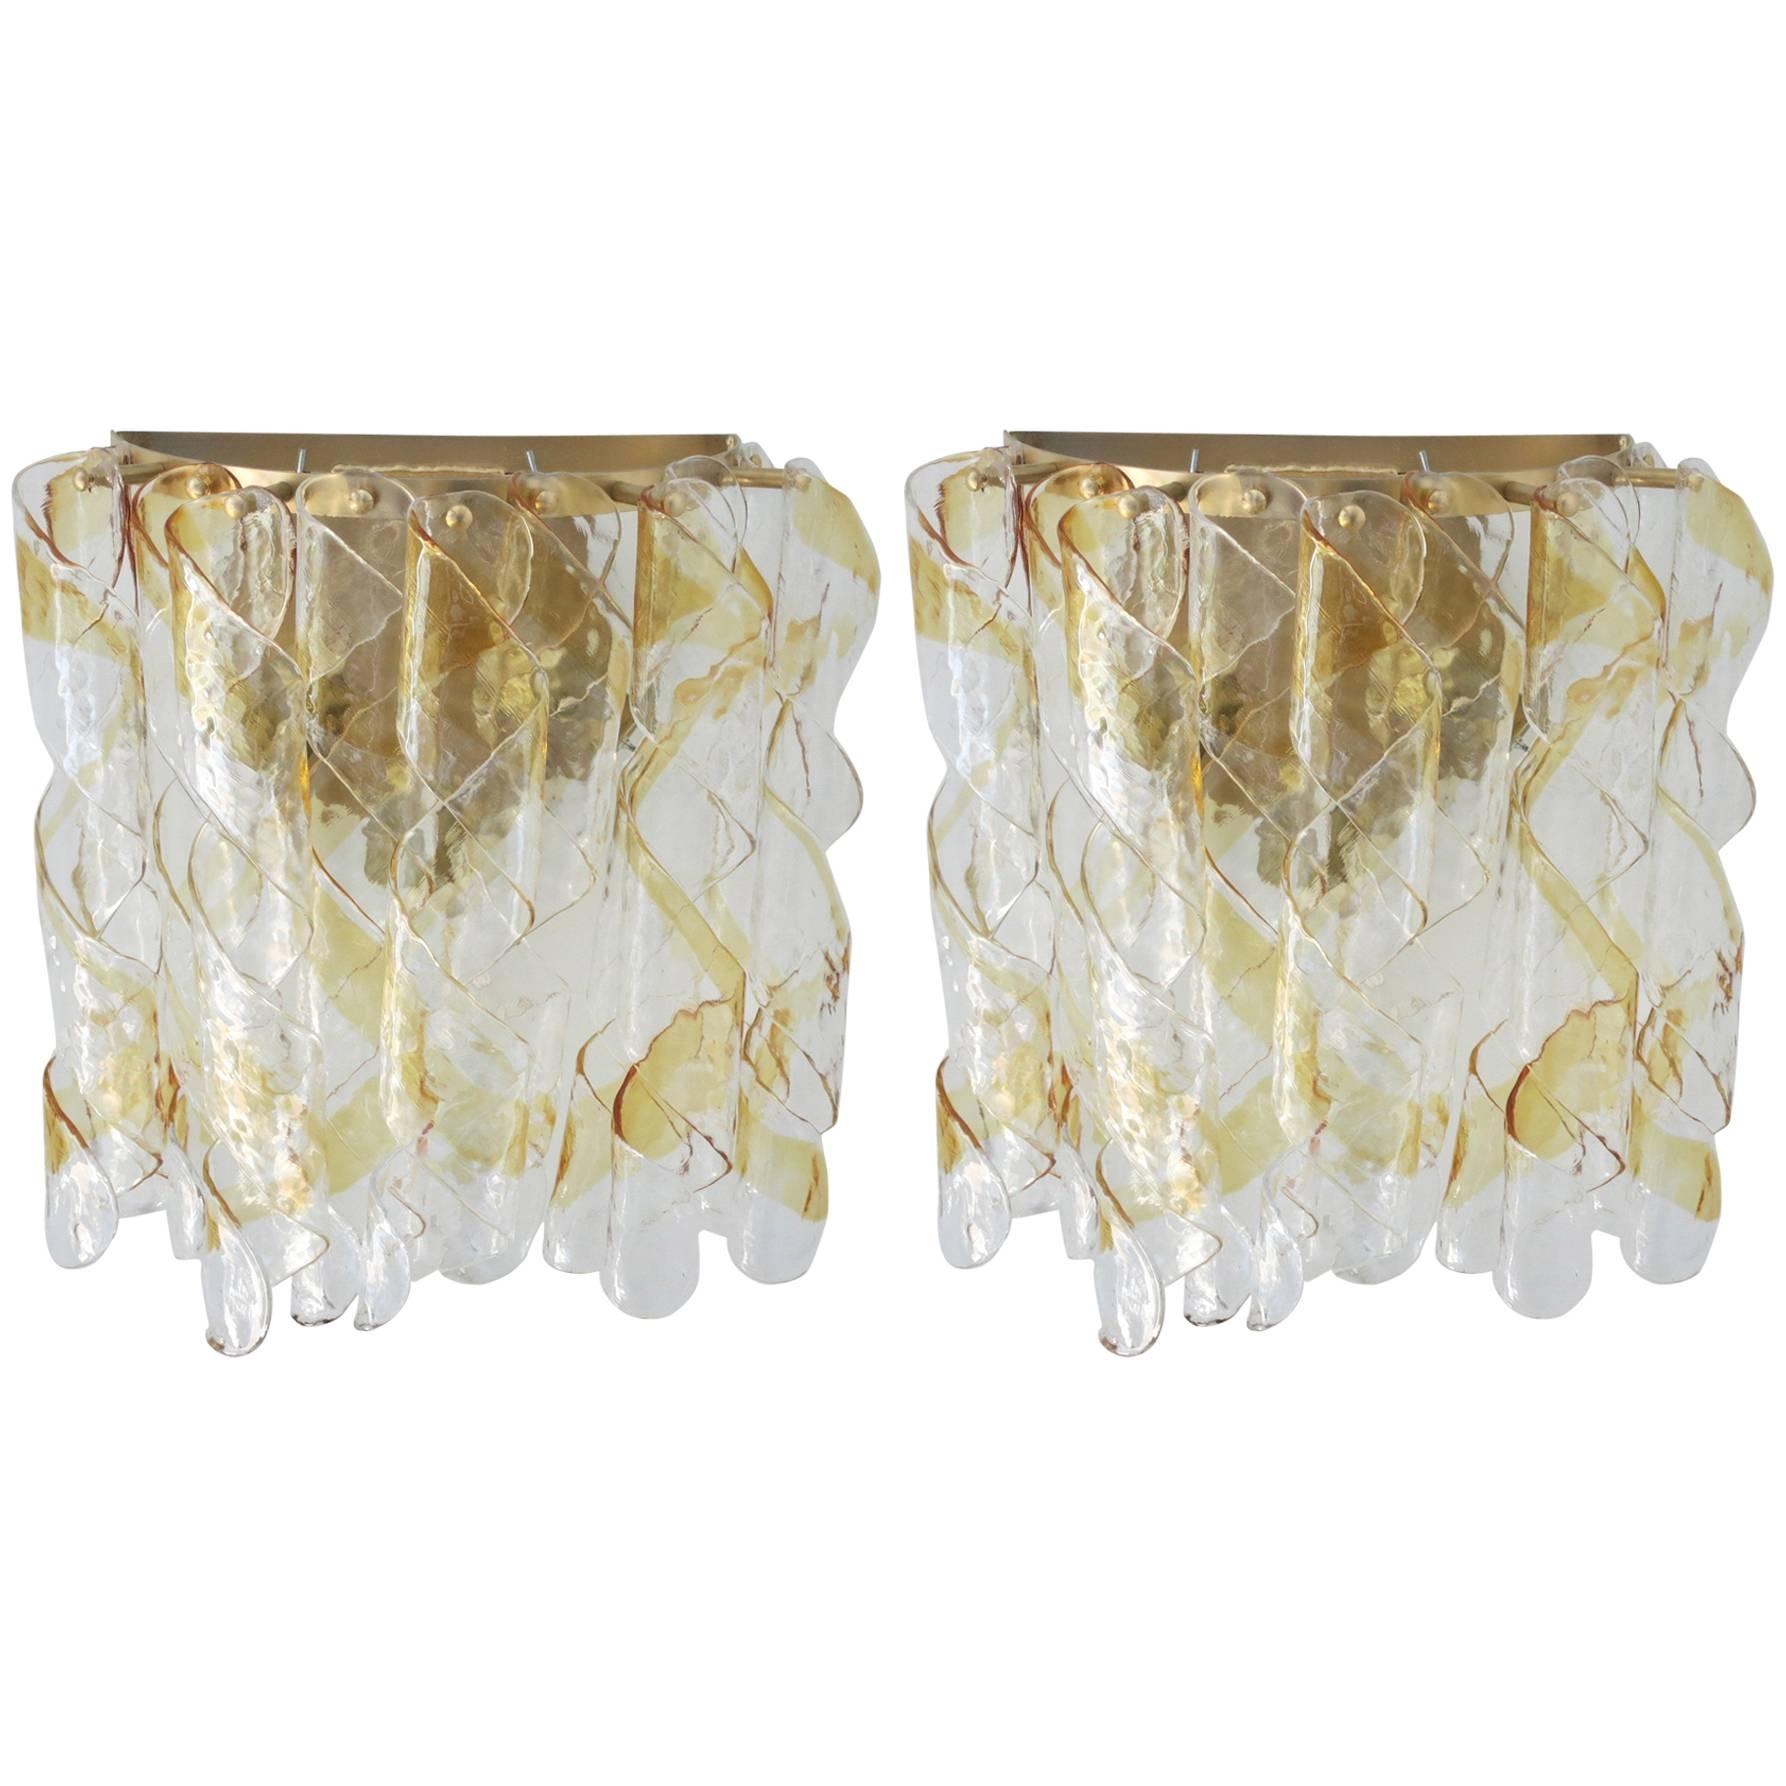 Pair of Ribbon Sconces by Mazzega FINAL CLEARANCE SALE